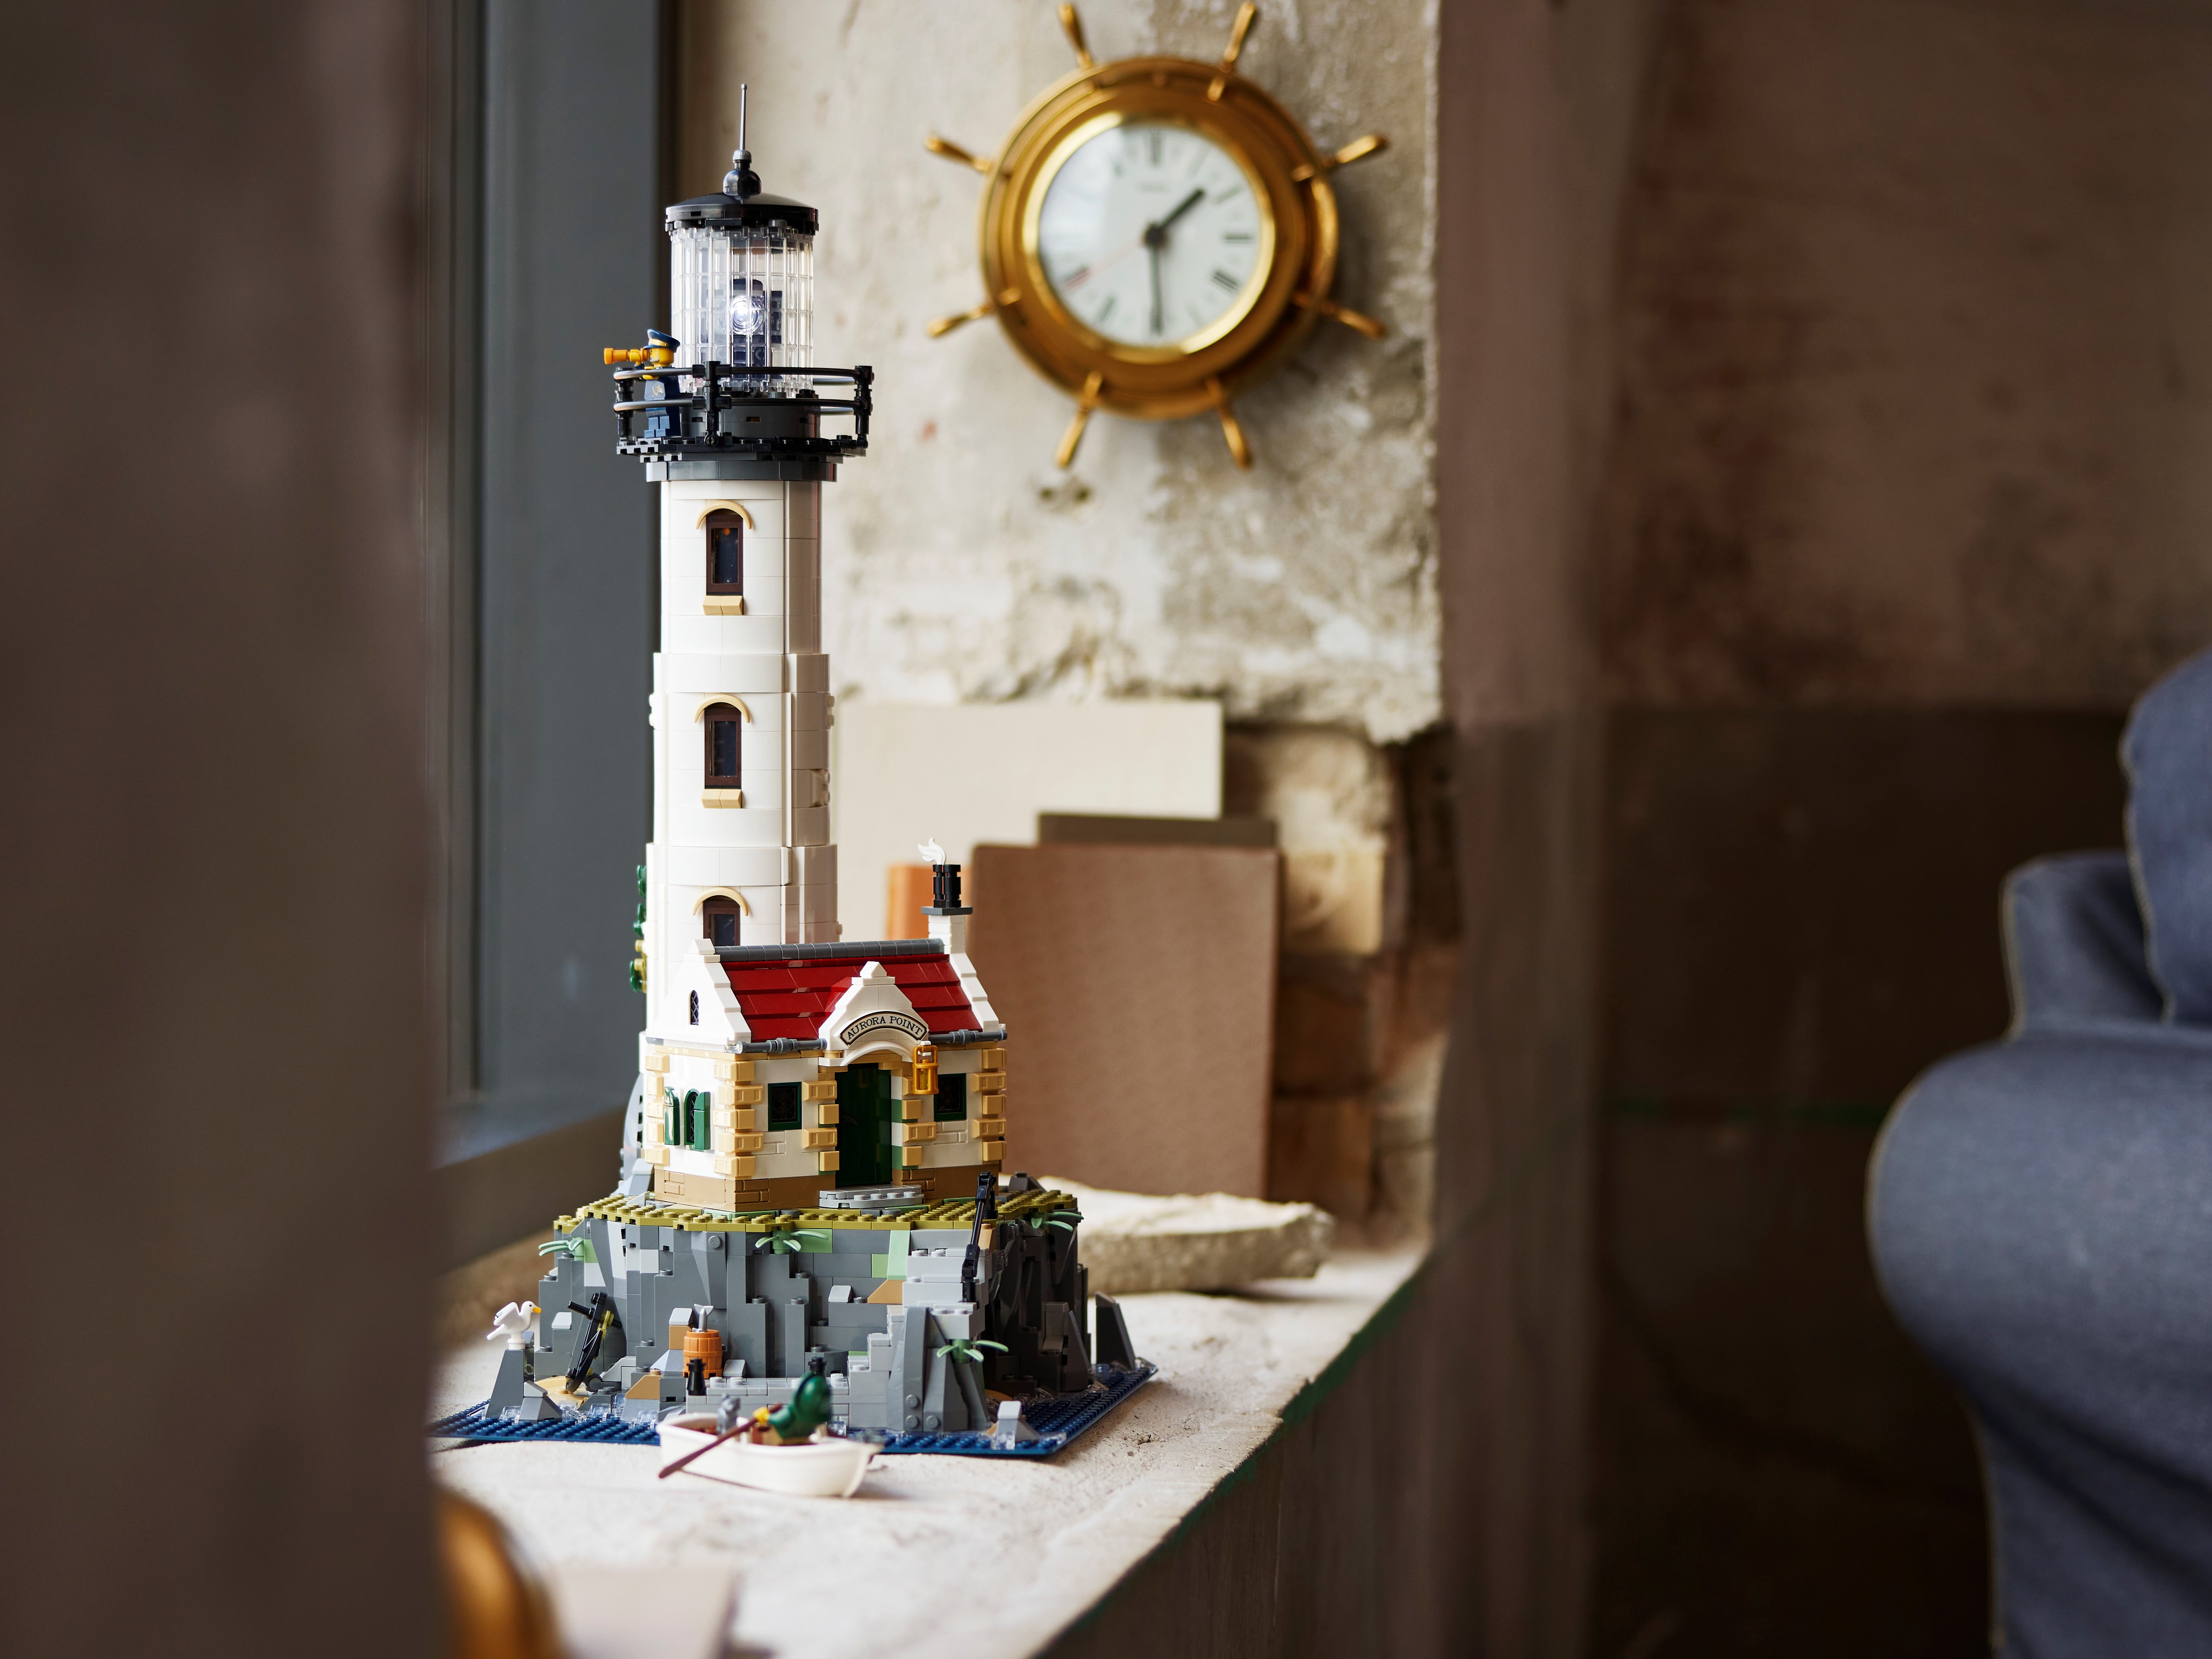 Lighthouse 21335 Ideas | Buy online at the Official LEGO® US